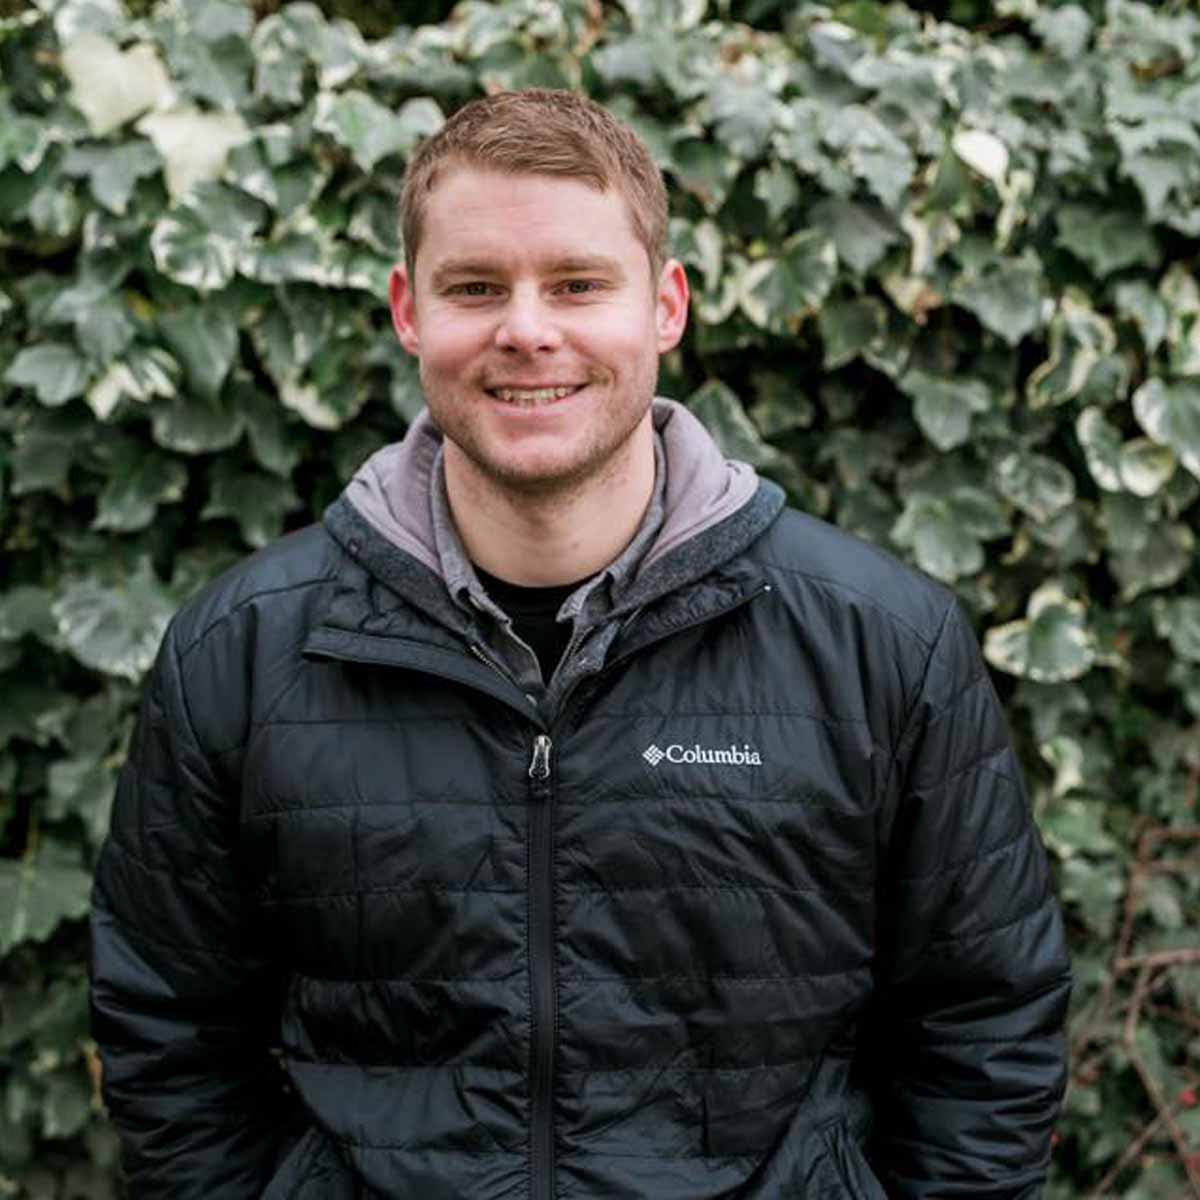 A decision to improve his health led University of Idaho student Colin Whitaker to a career in sports nutrition.